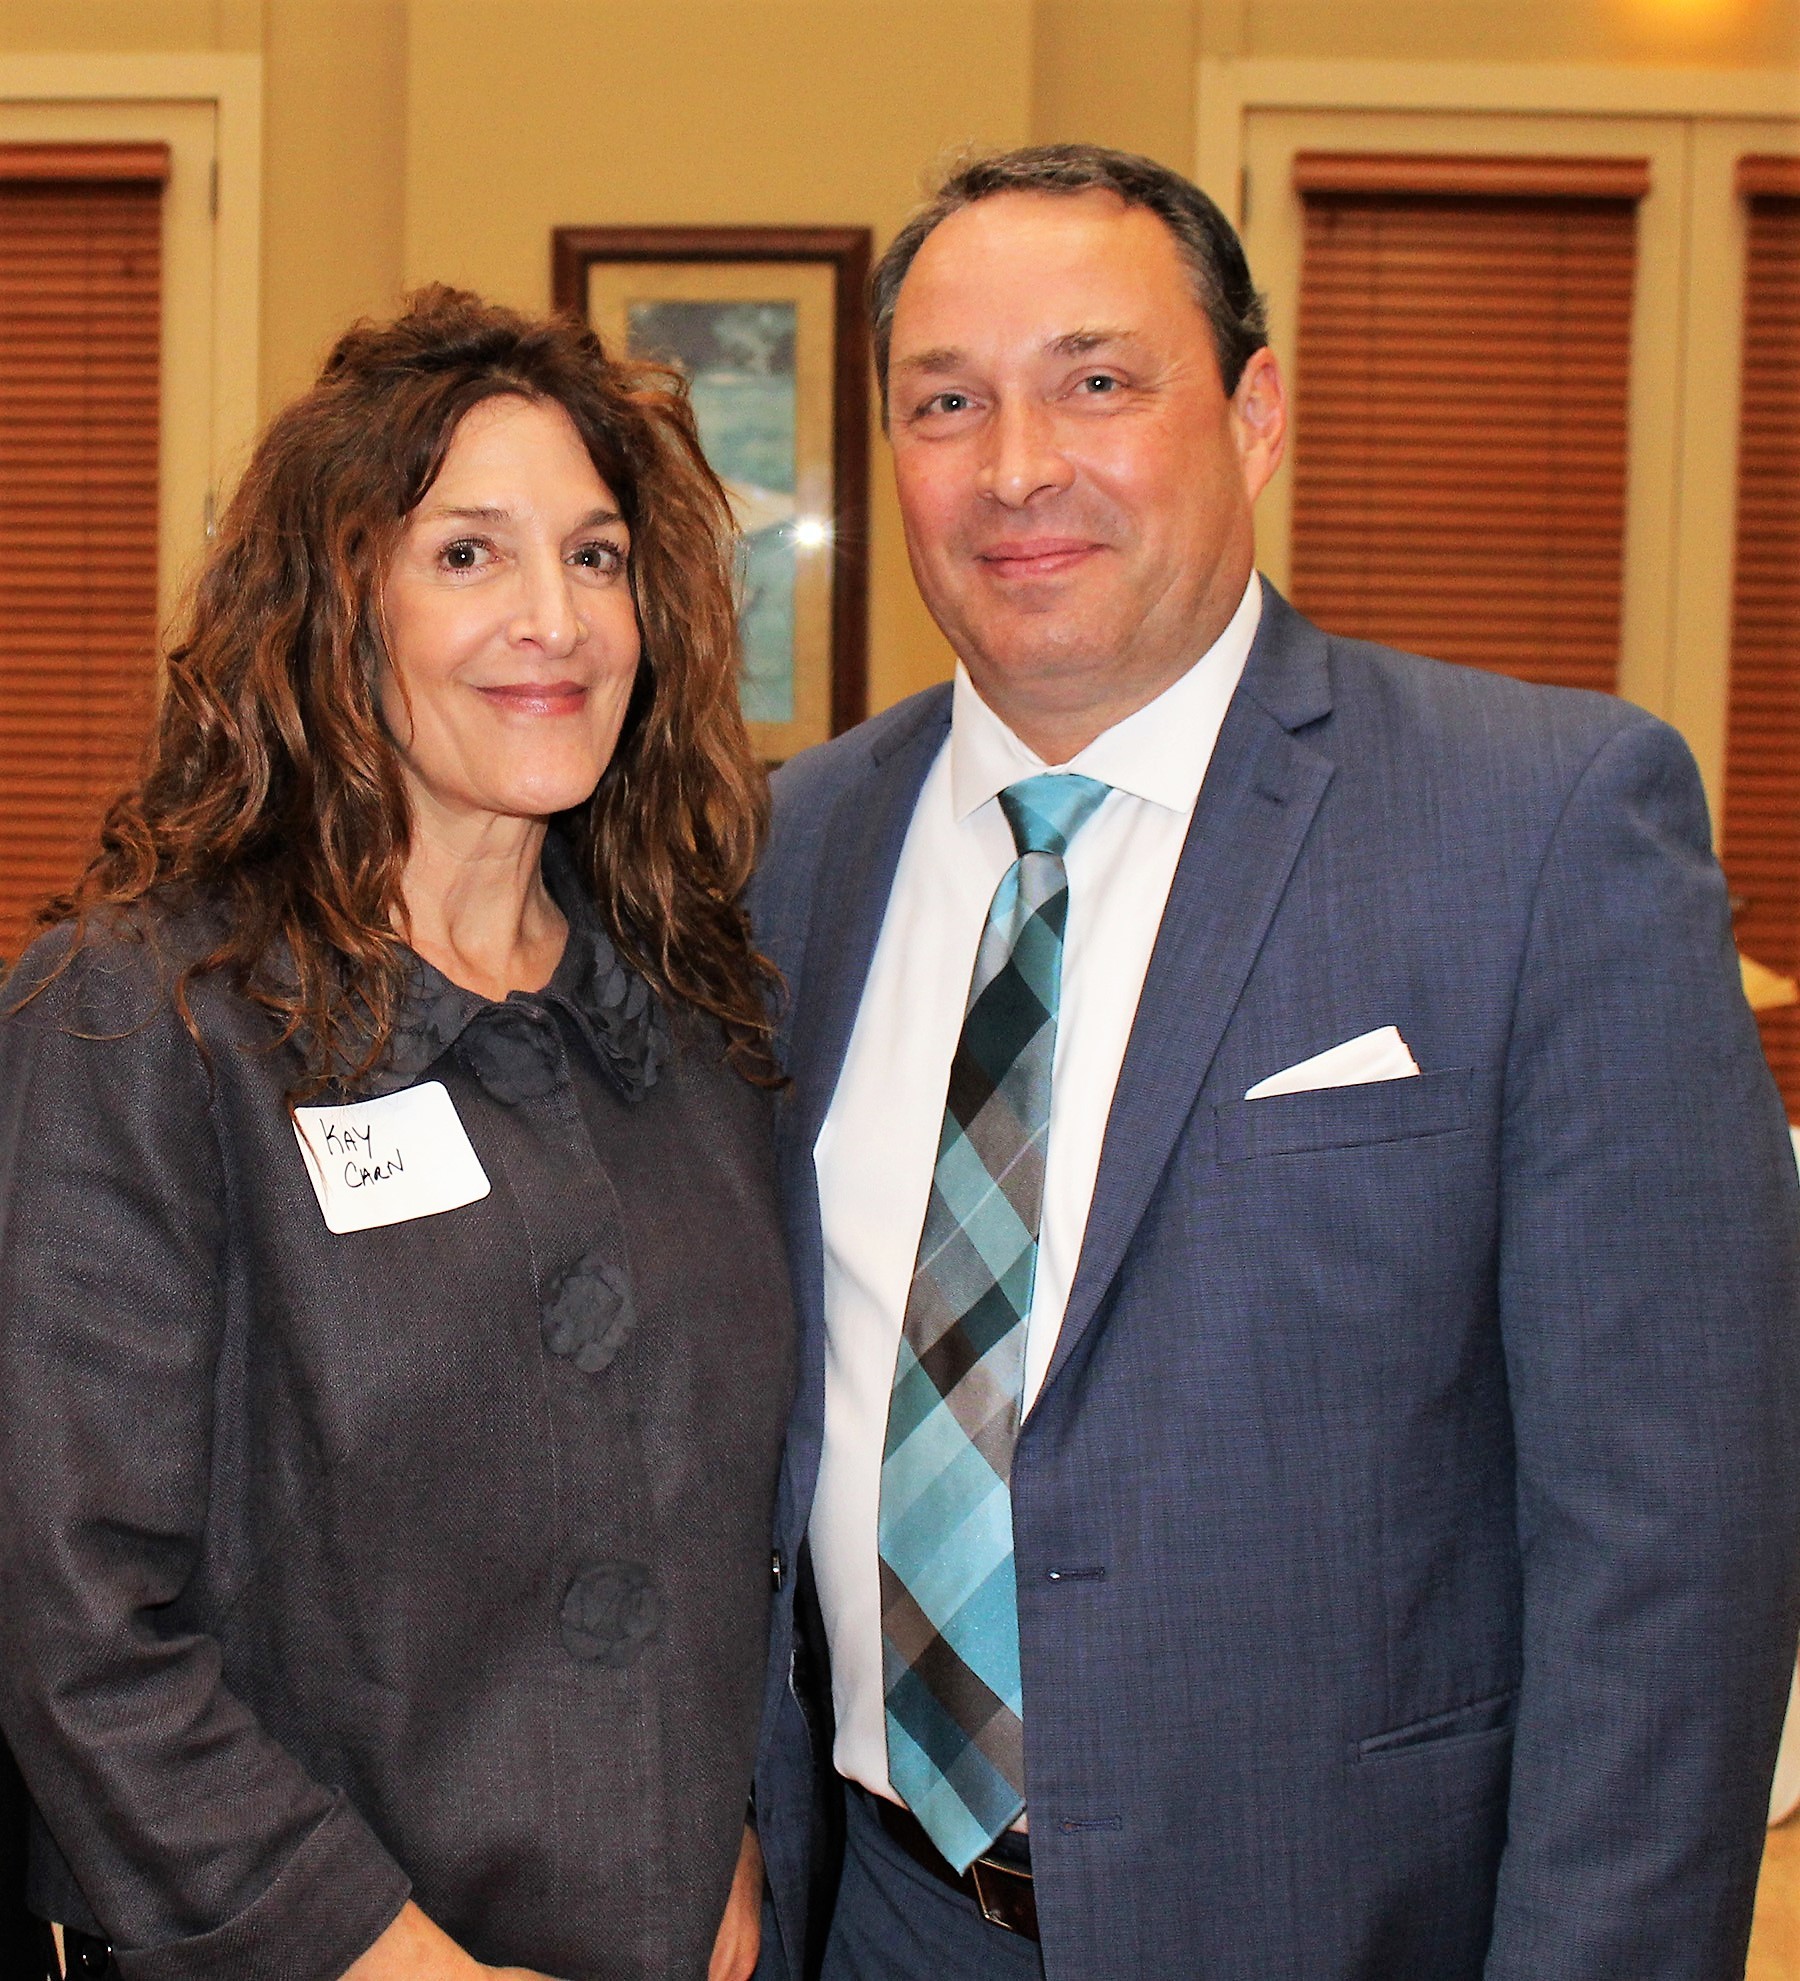 Kay and Steve Carn at the St. Johns County Chamber of Commerce Member Appreciation Awards. Carn accepted the Jeff Jenkins Community Service Award on behalf of Advanced Disposal.